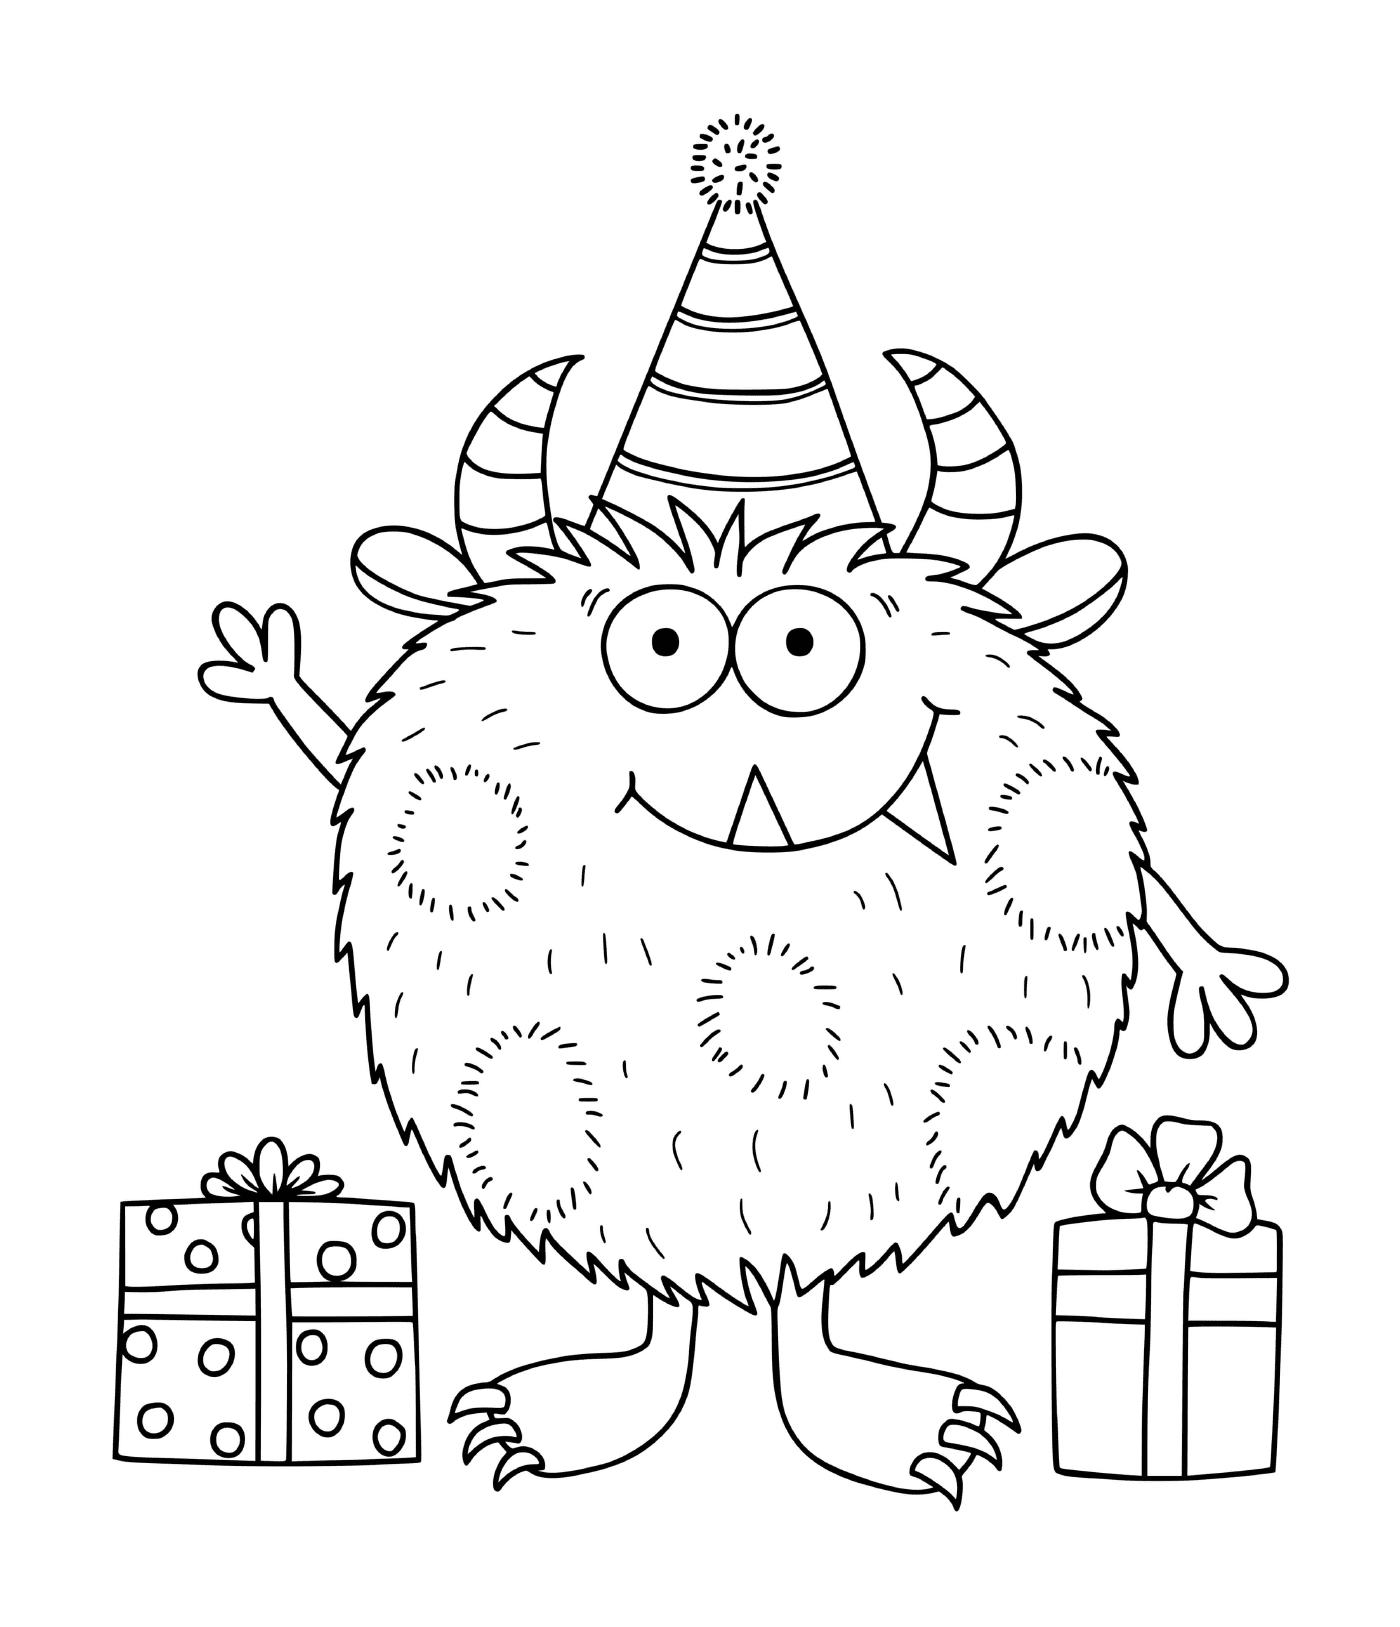  A funny monster celebrating anniversaries 